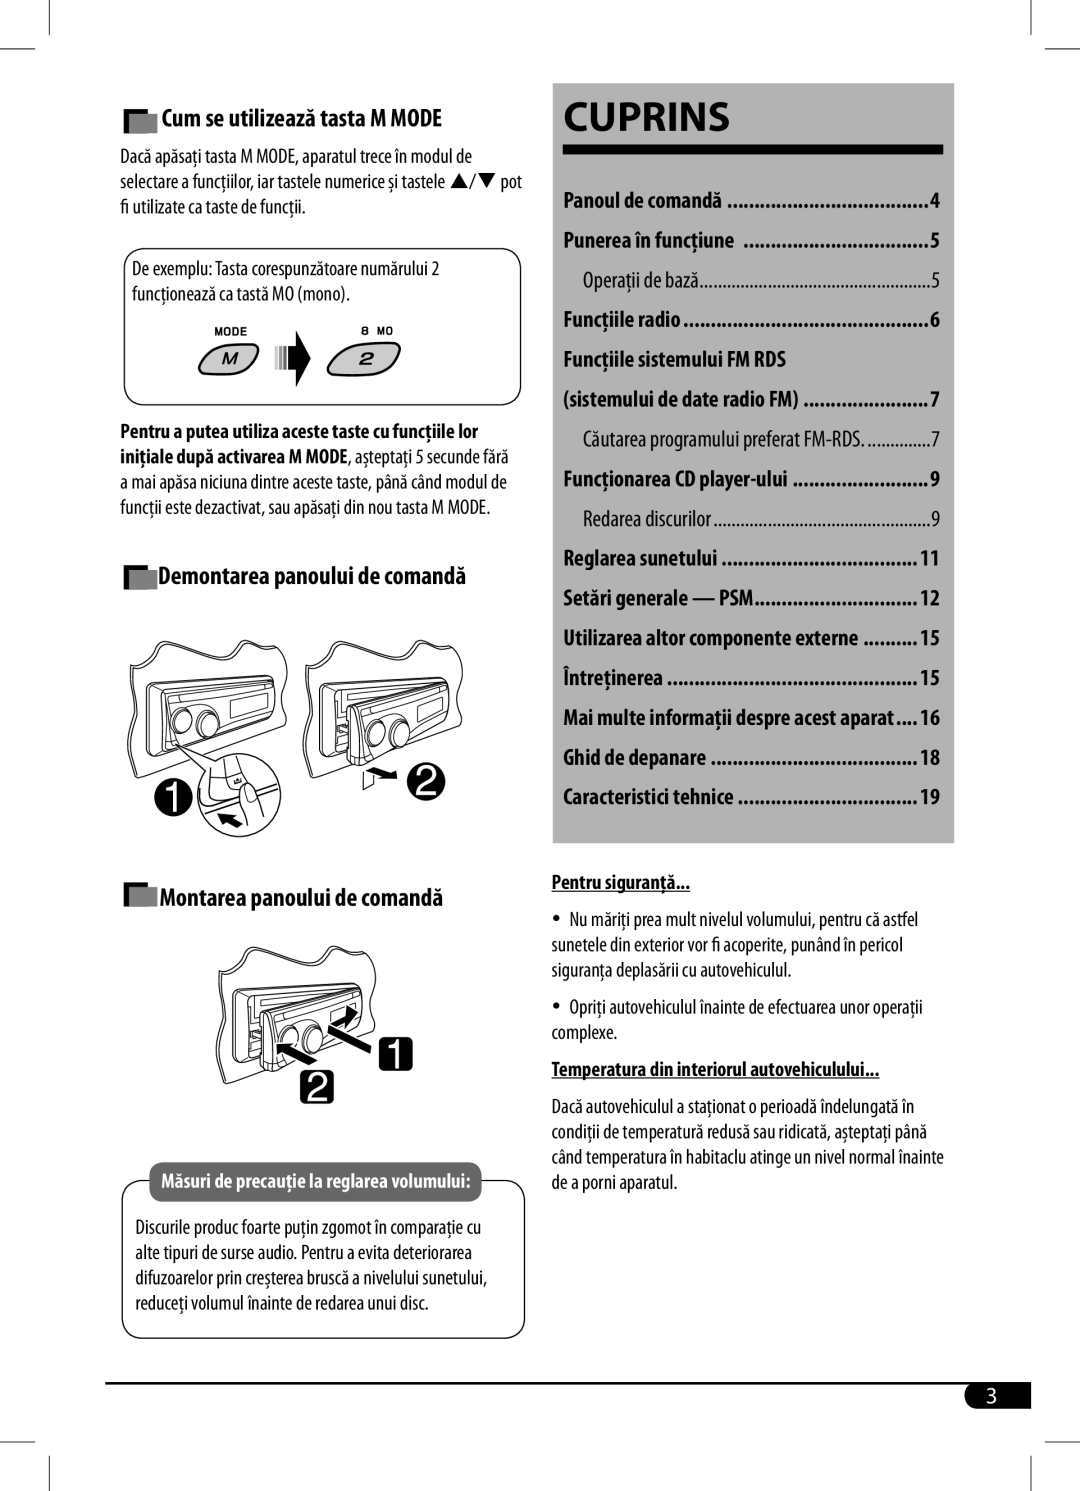 JVC KD-R201, KD-R203 manual How to use the M button, Cuprins 